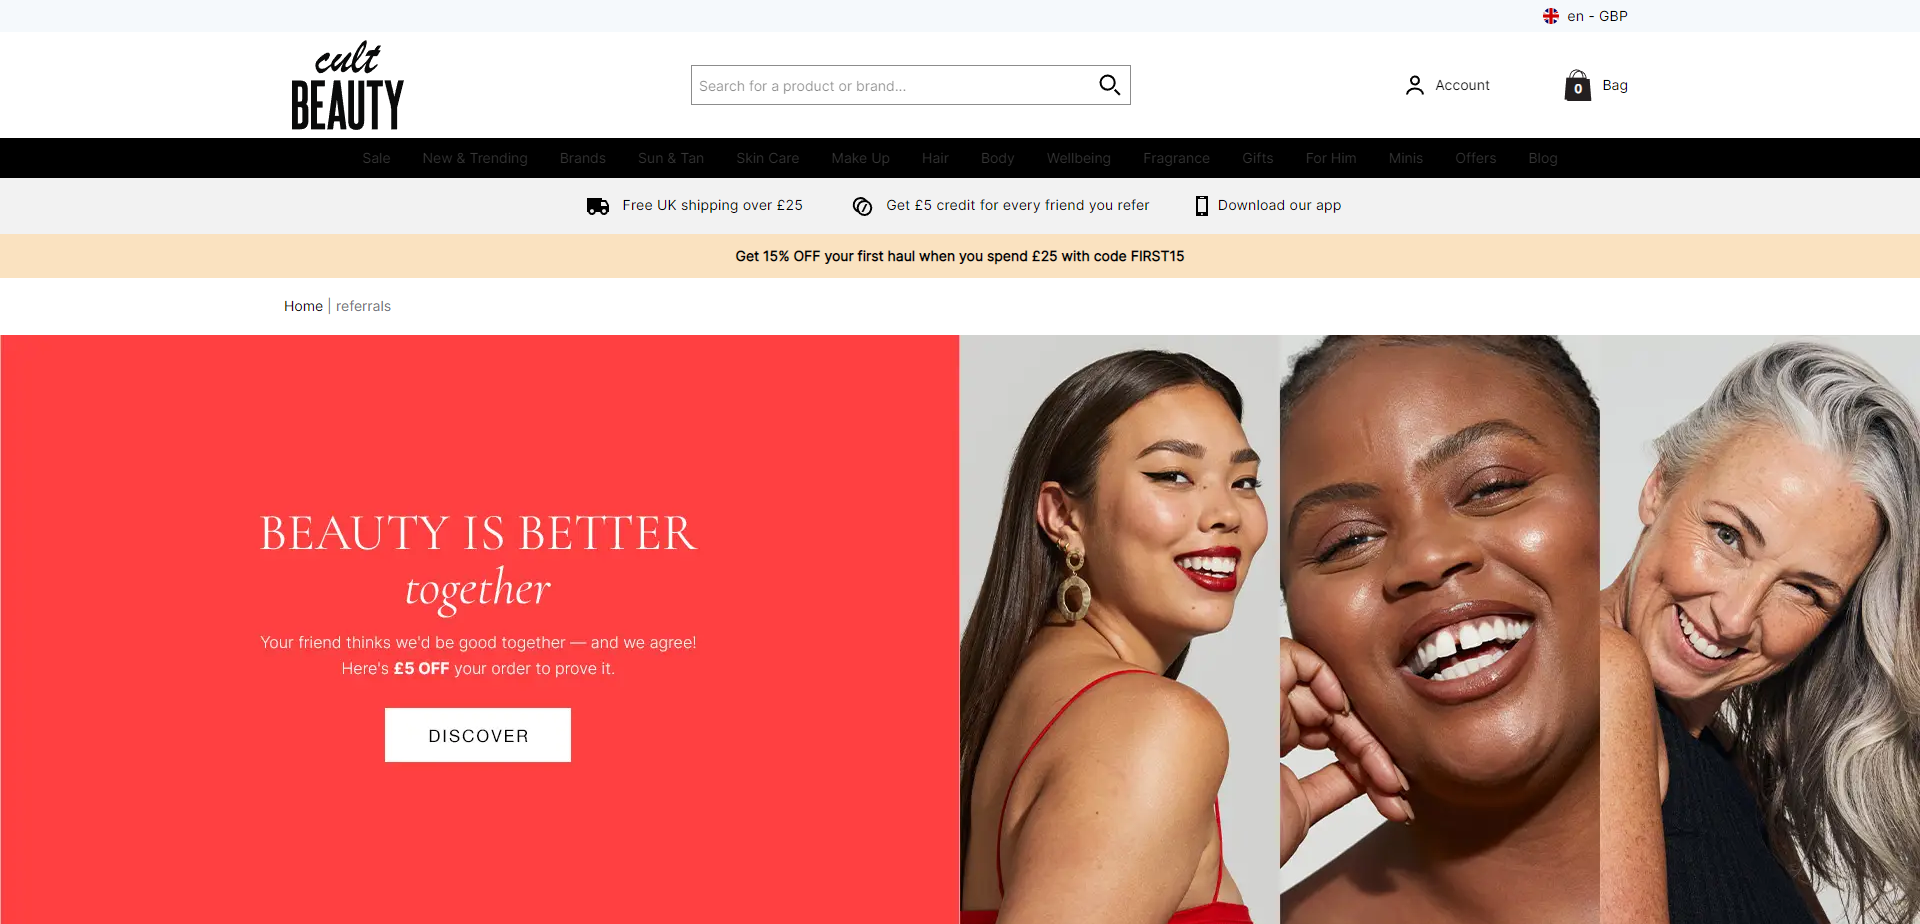 Referral Landing Page for Cult Beauty